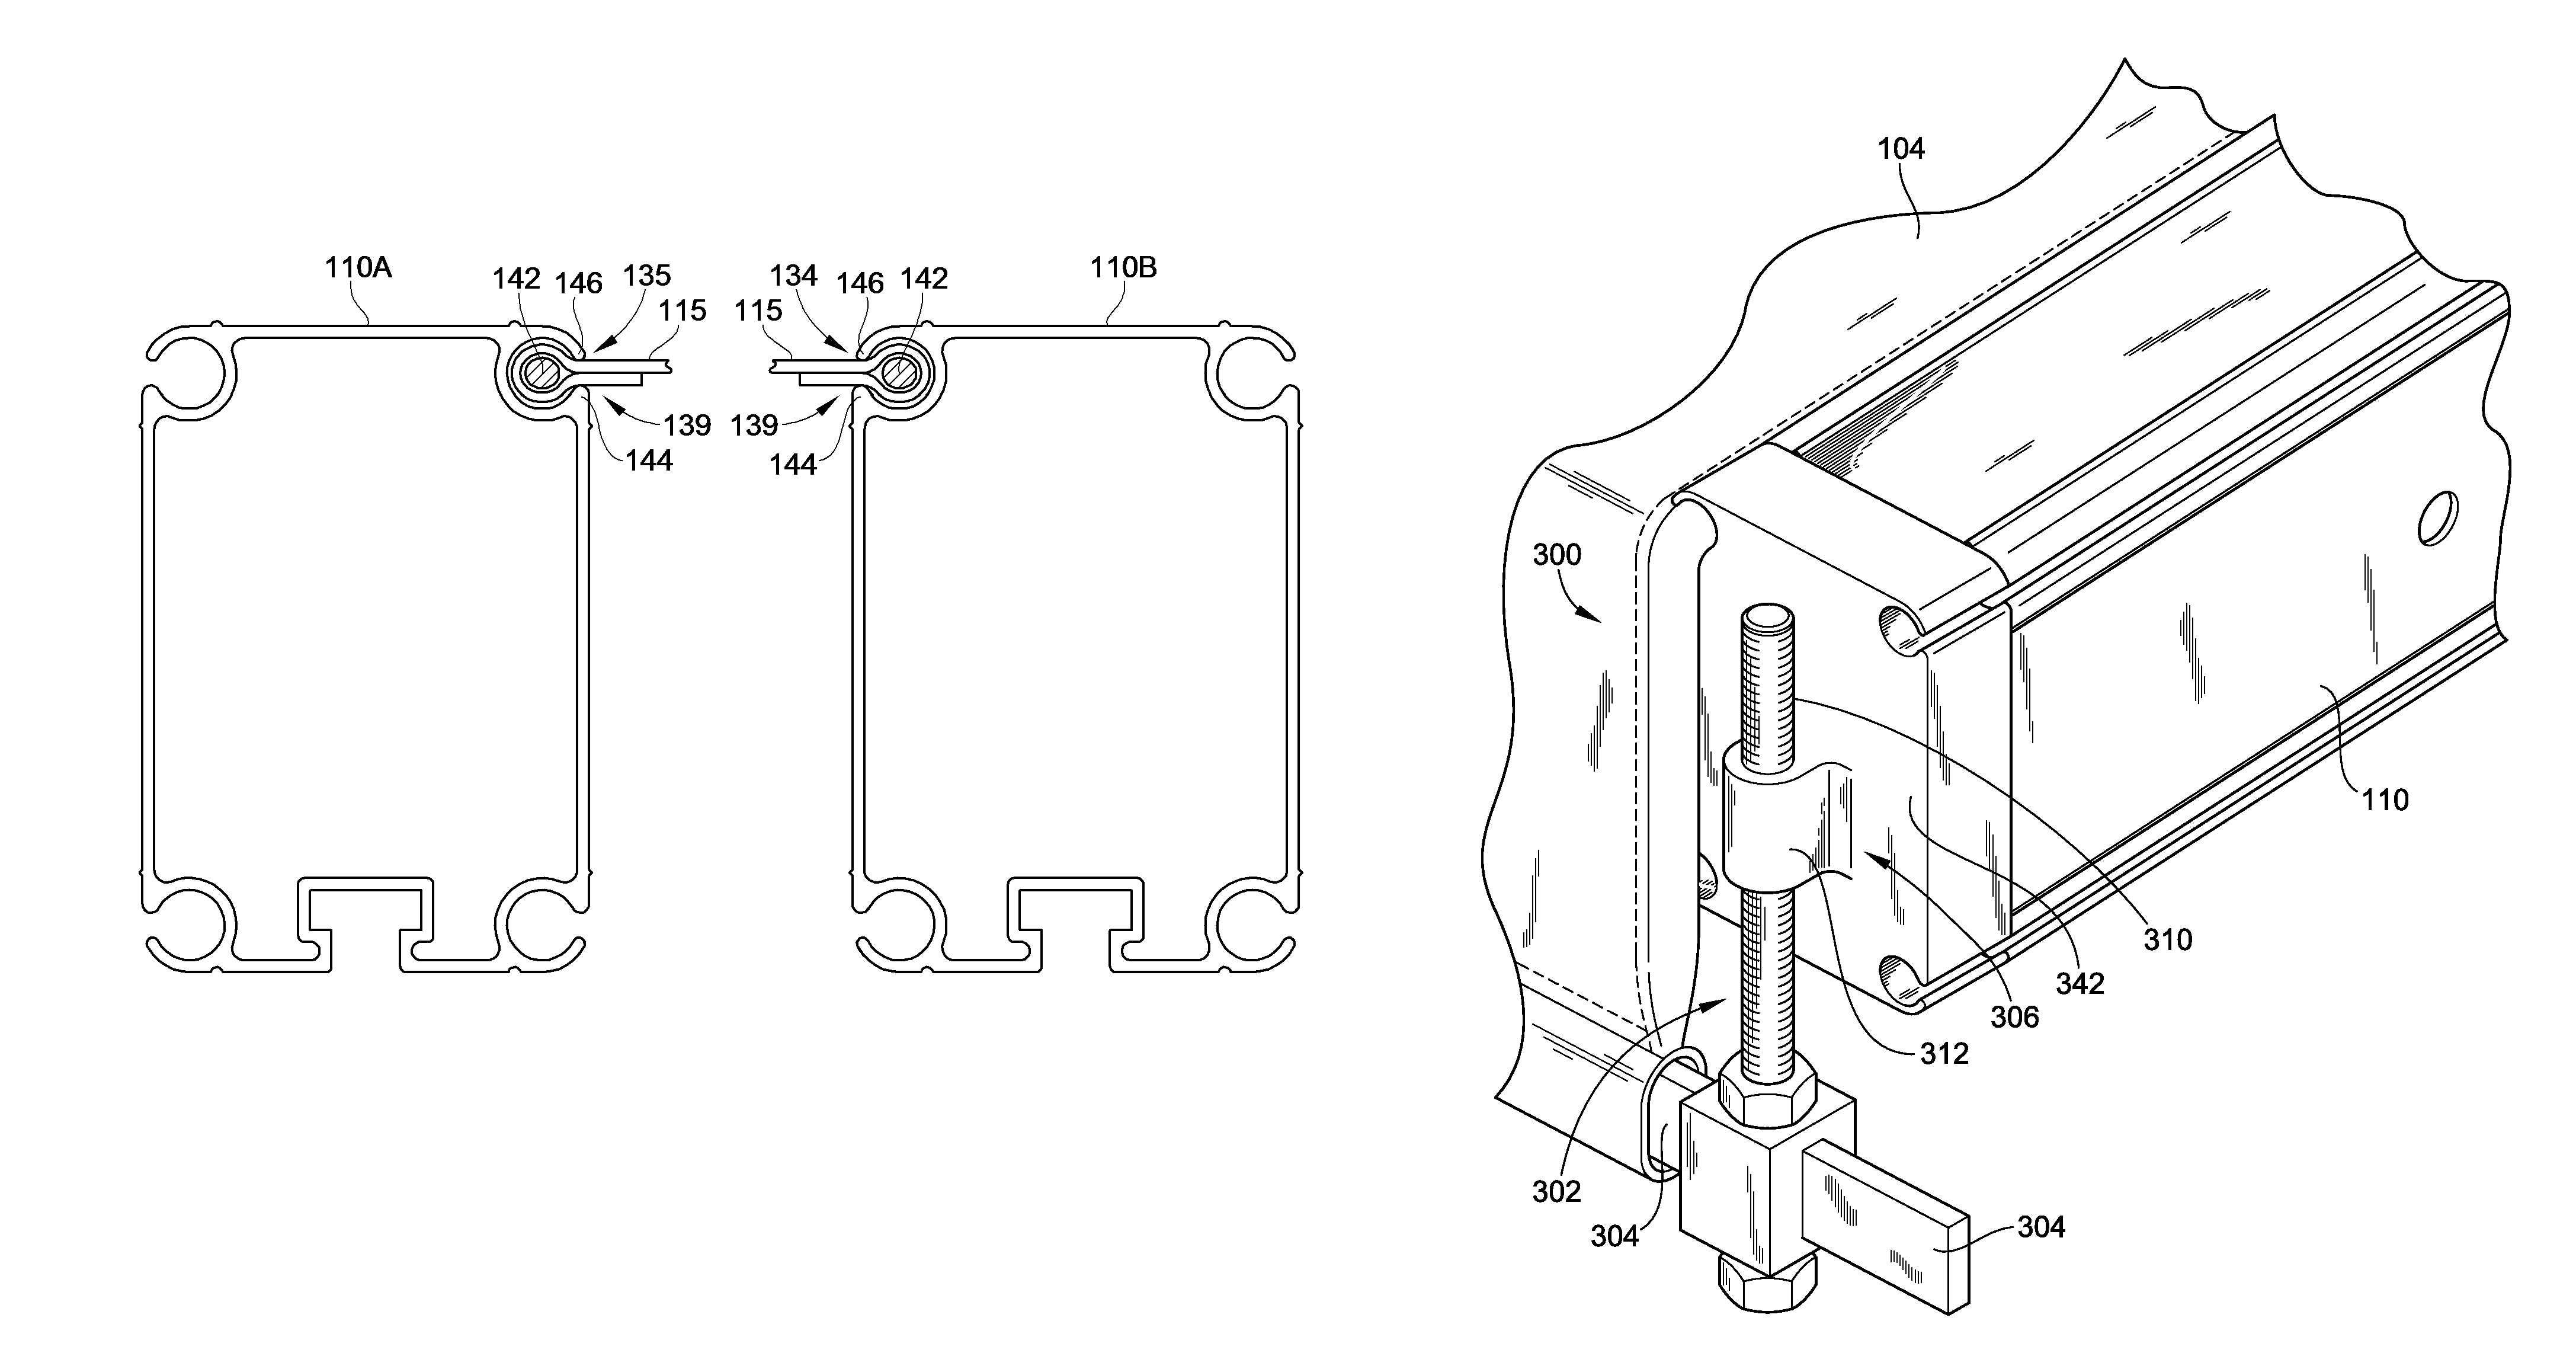 Tent rafter end cap and tent incorporating same